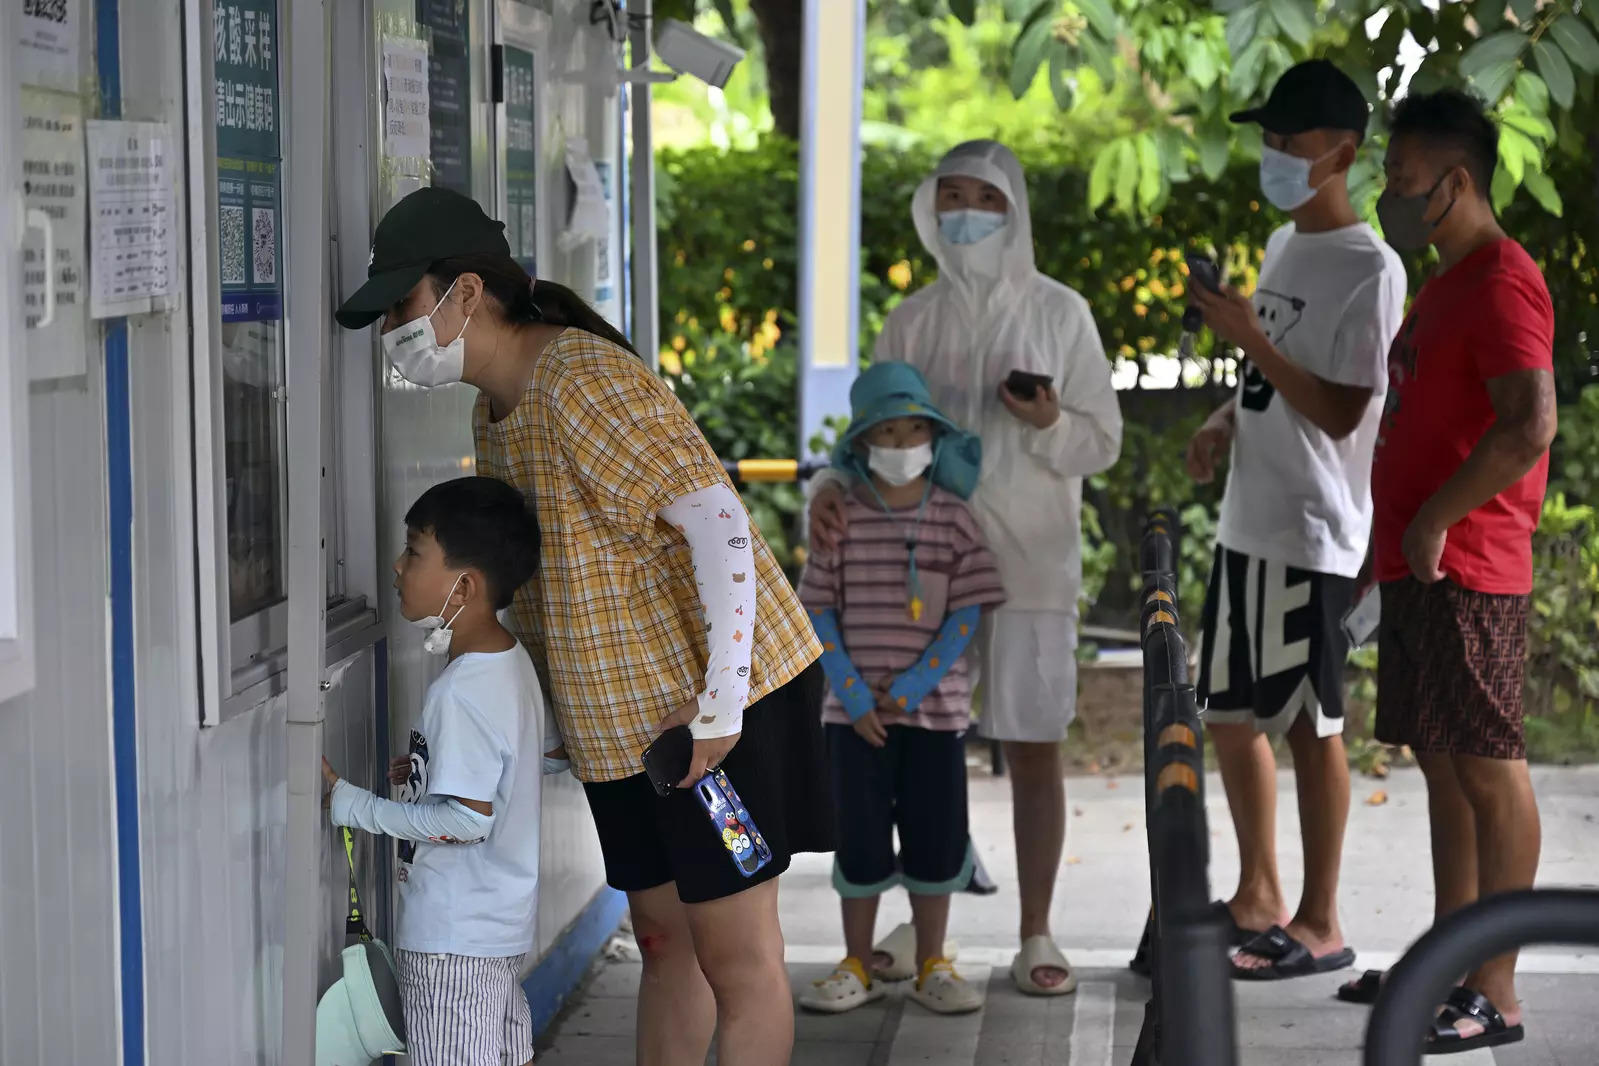 Tourists wearing face masks wait in line to get their Covid-19 test at a coronavirus testing site in Sanya in south China's Hainan Province on Sunday. (AP file photo)